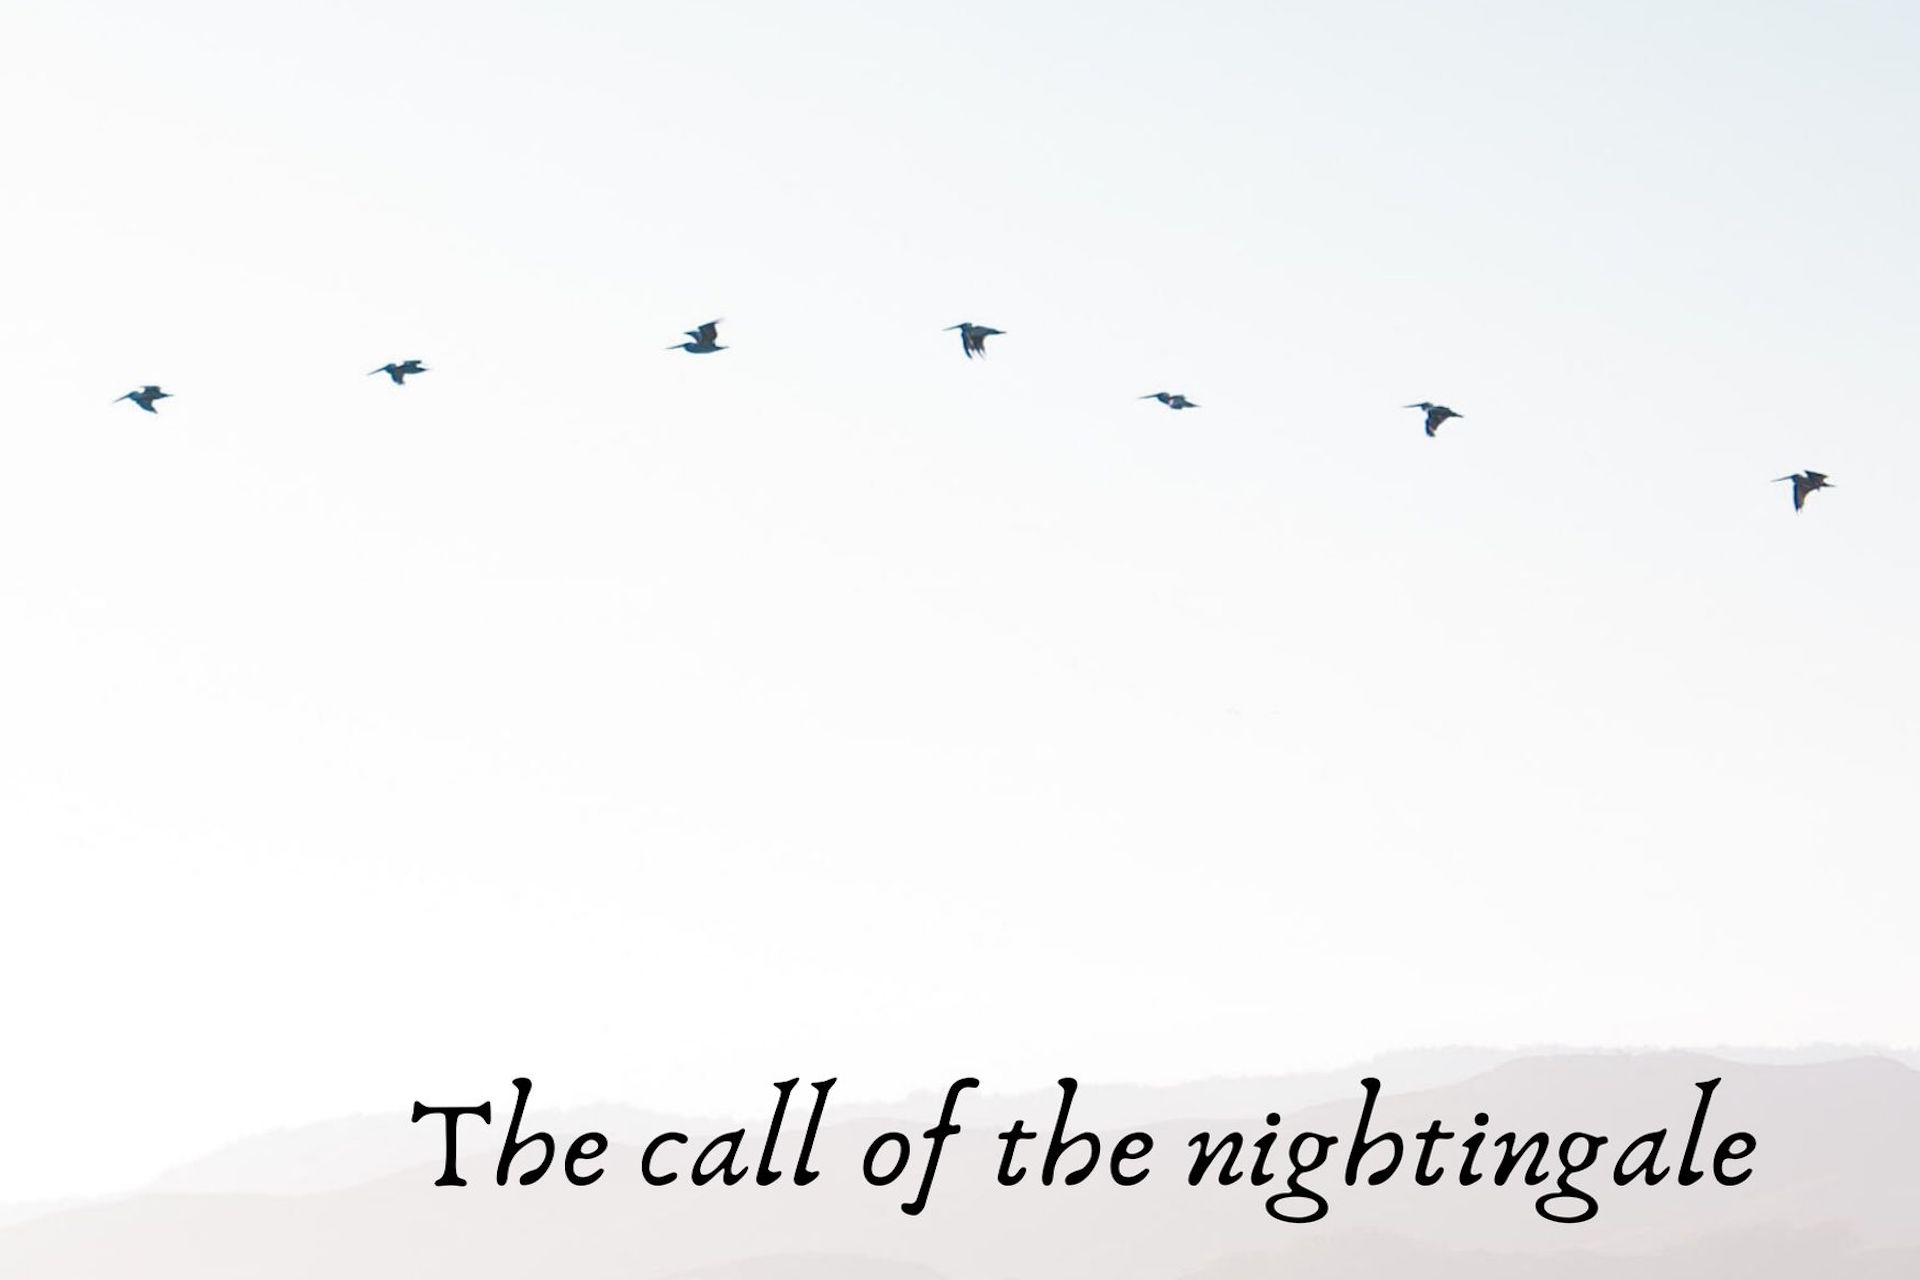 The call of the nightingale